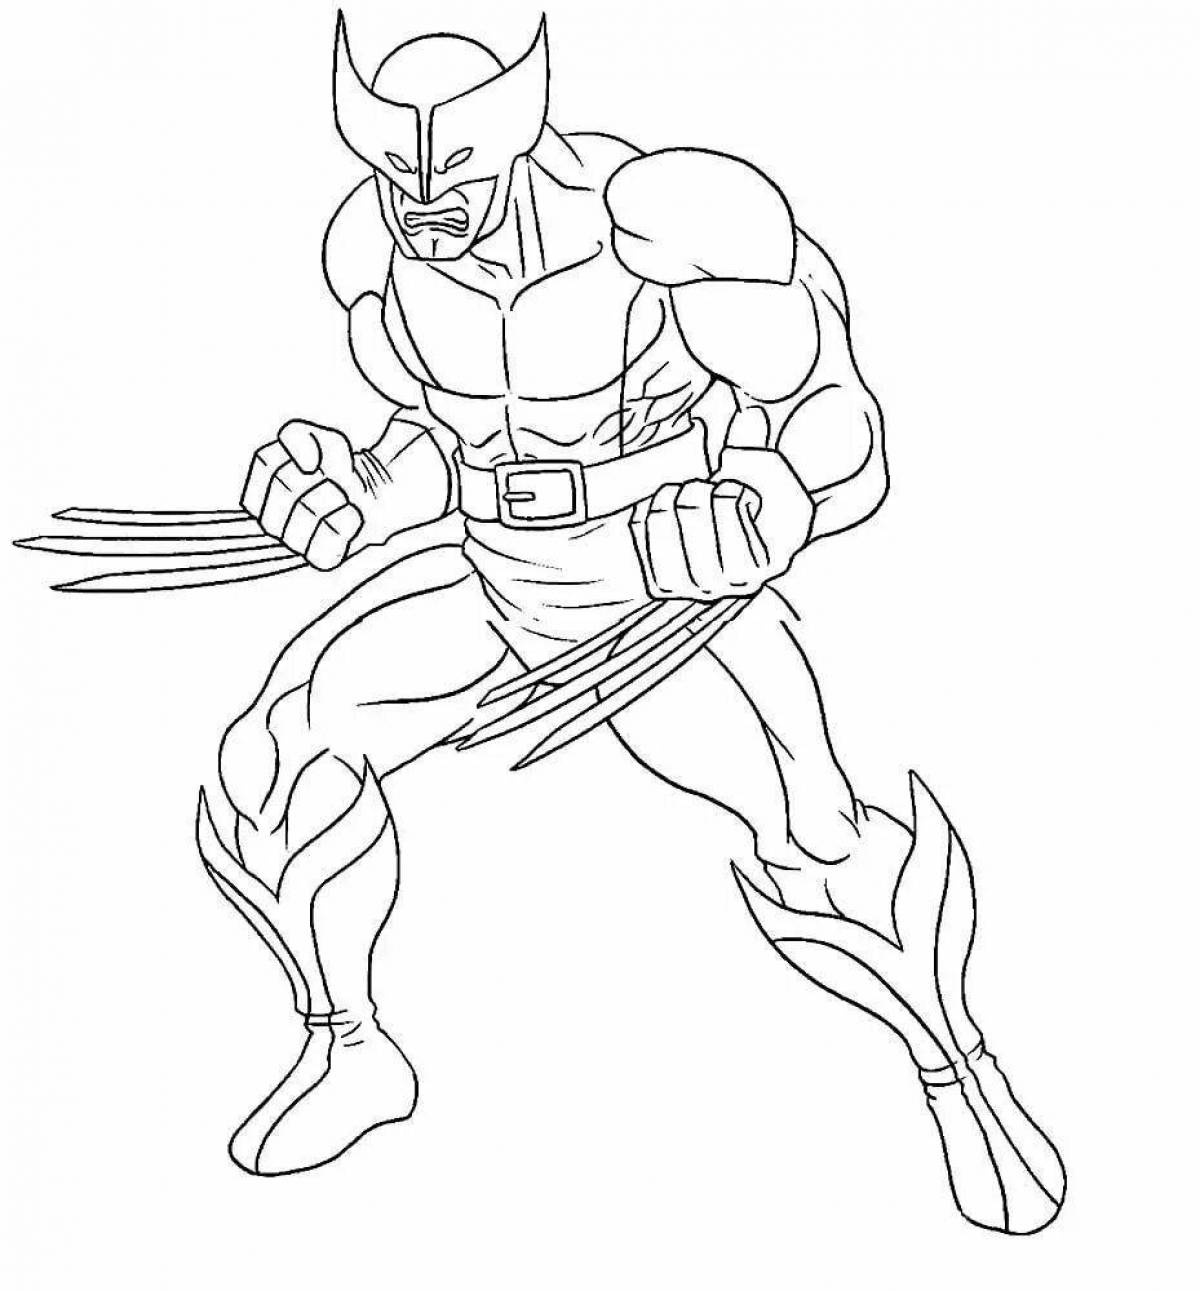 Amazing superhero coloring page for boys 5 years old